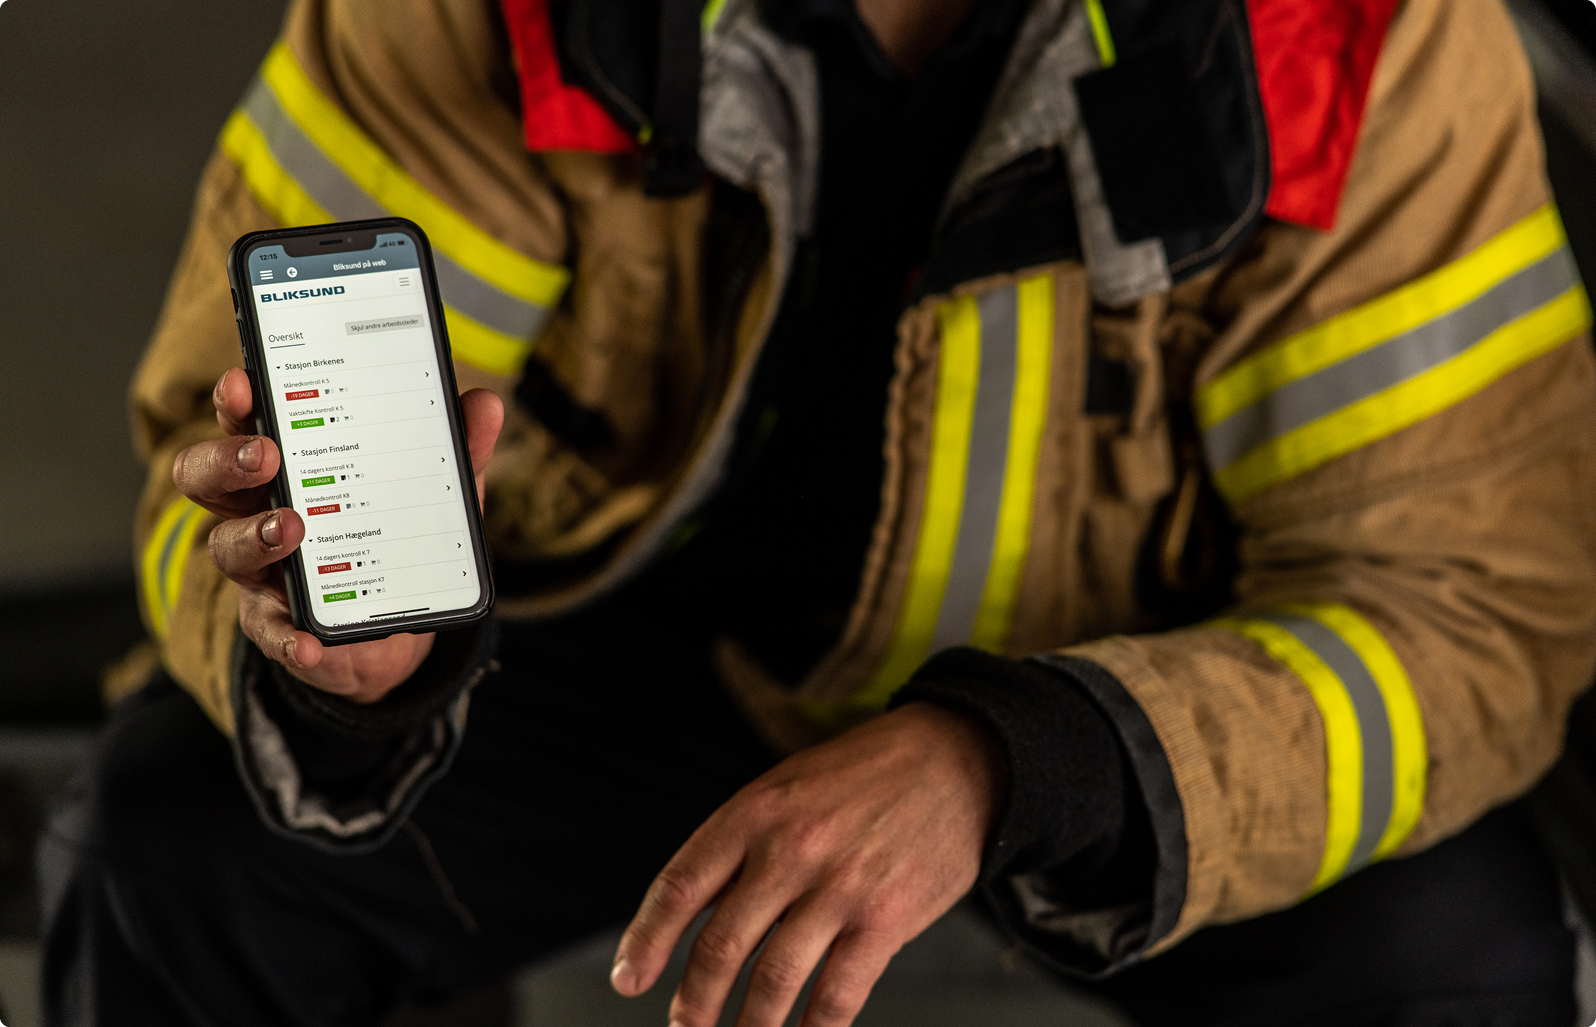 Firefighter shows off the operational professional system GRID on a smartphone